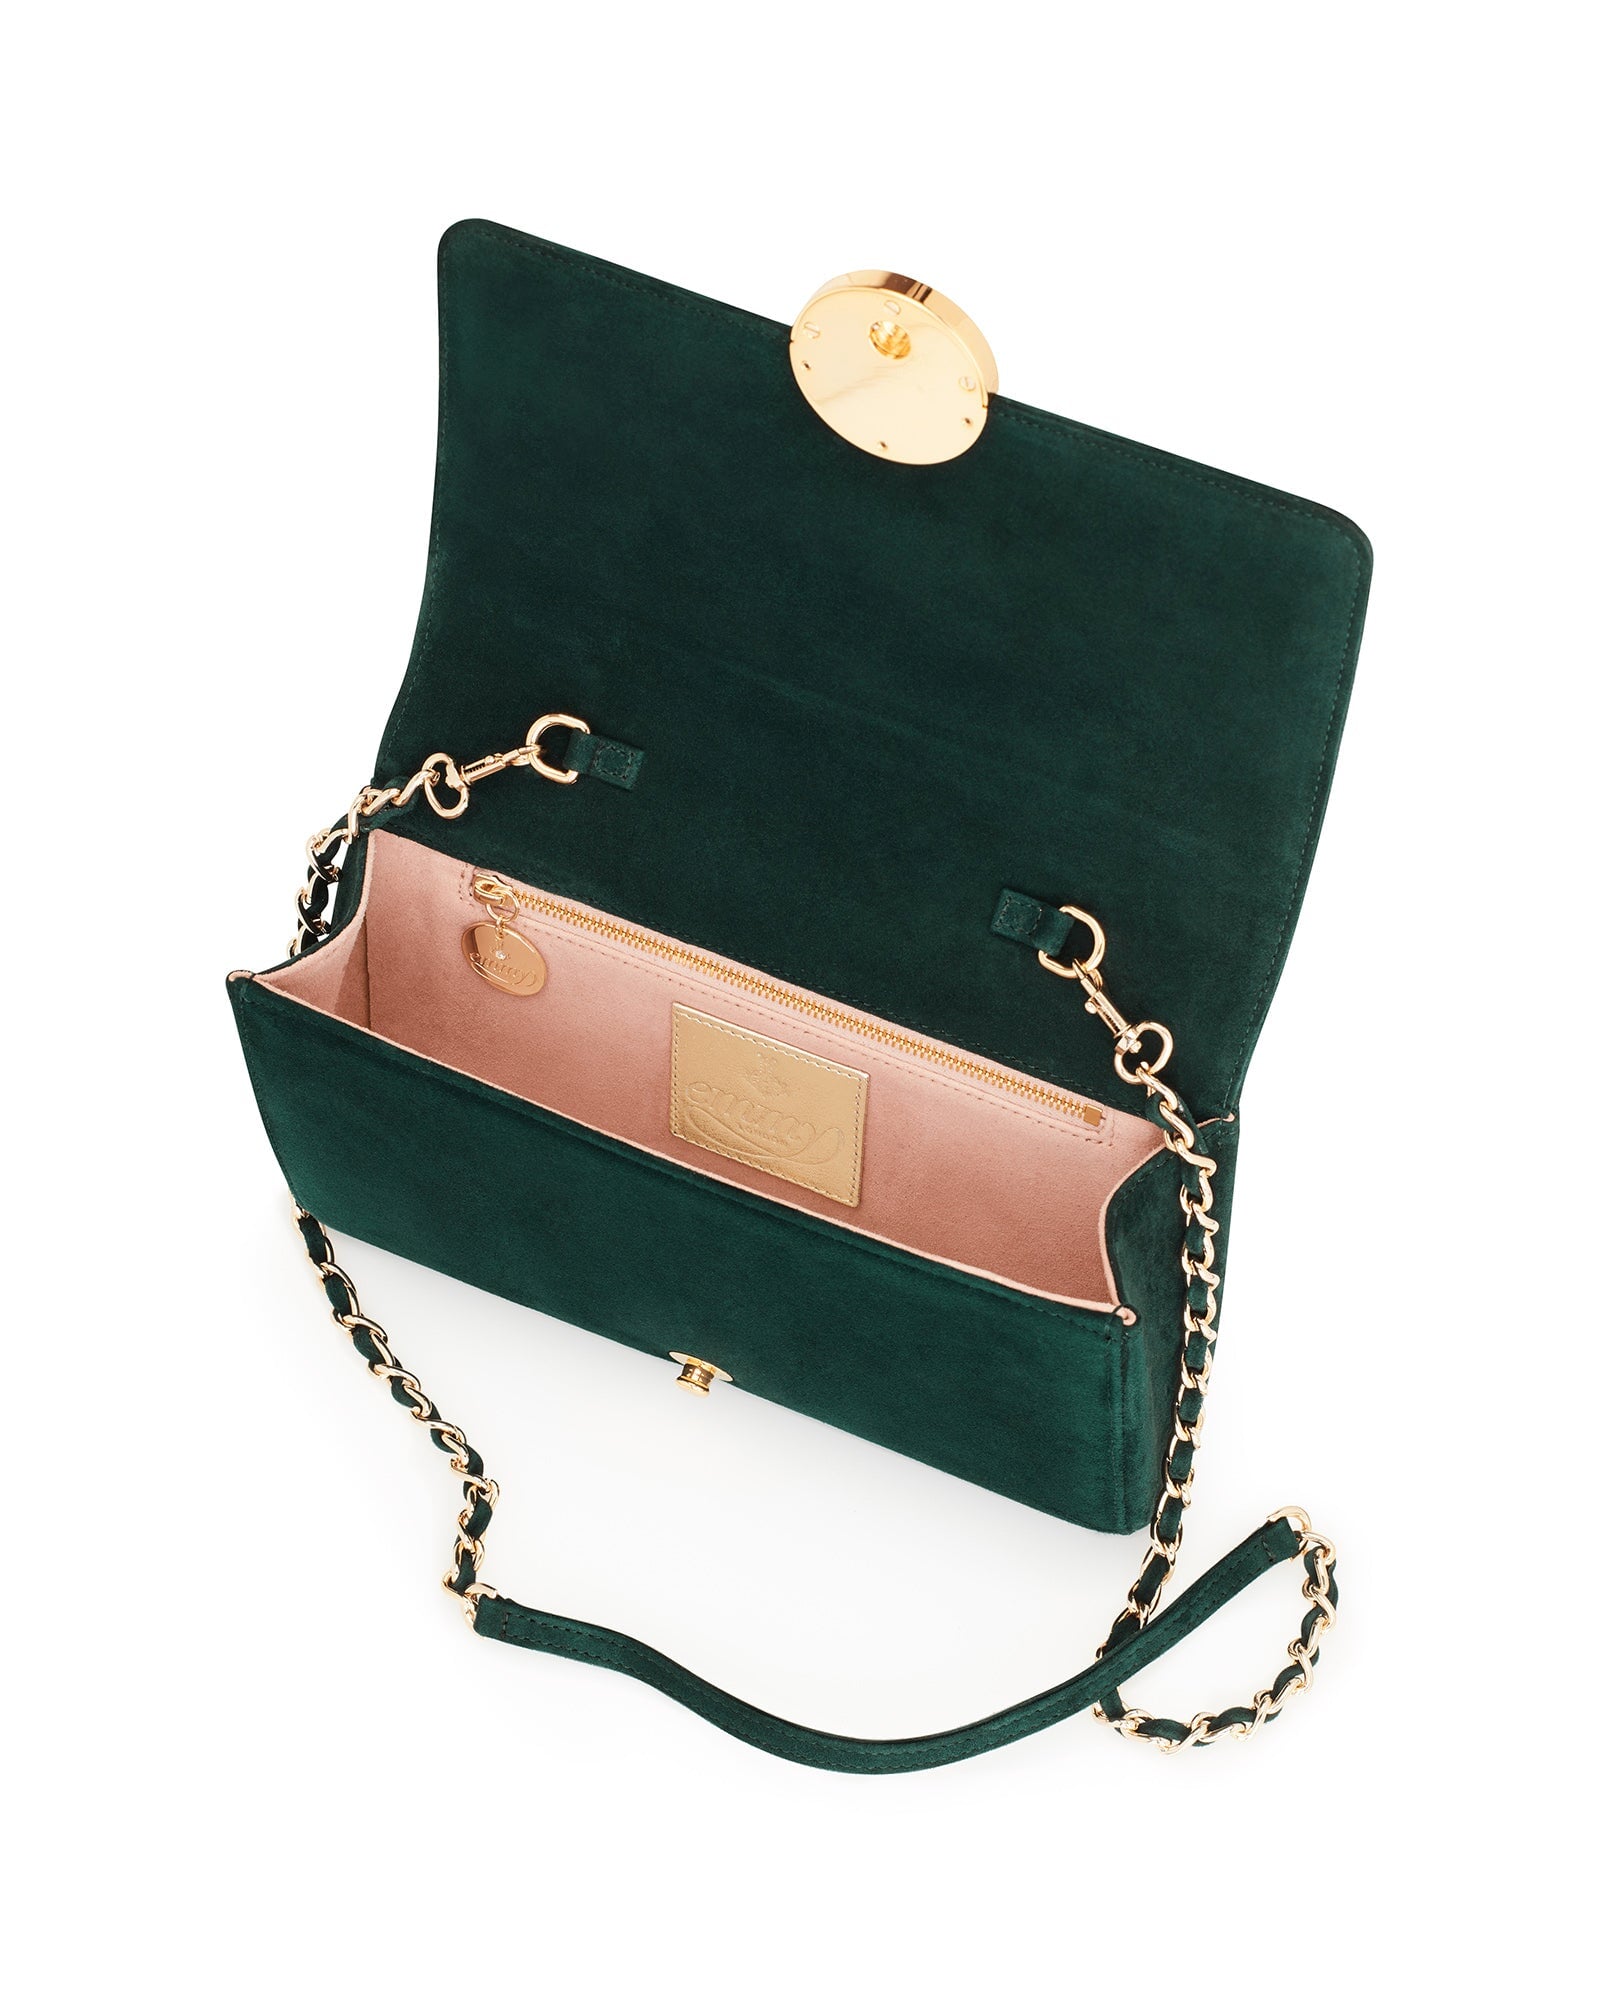 Naomi Greenery Occasion Bag Green Suede Clutch Bag  image